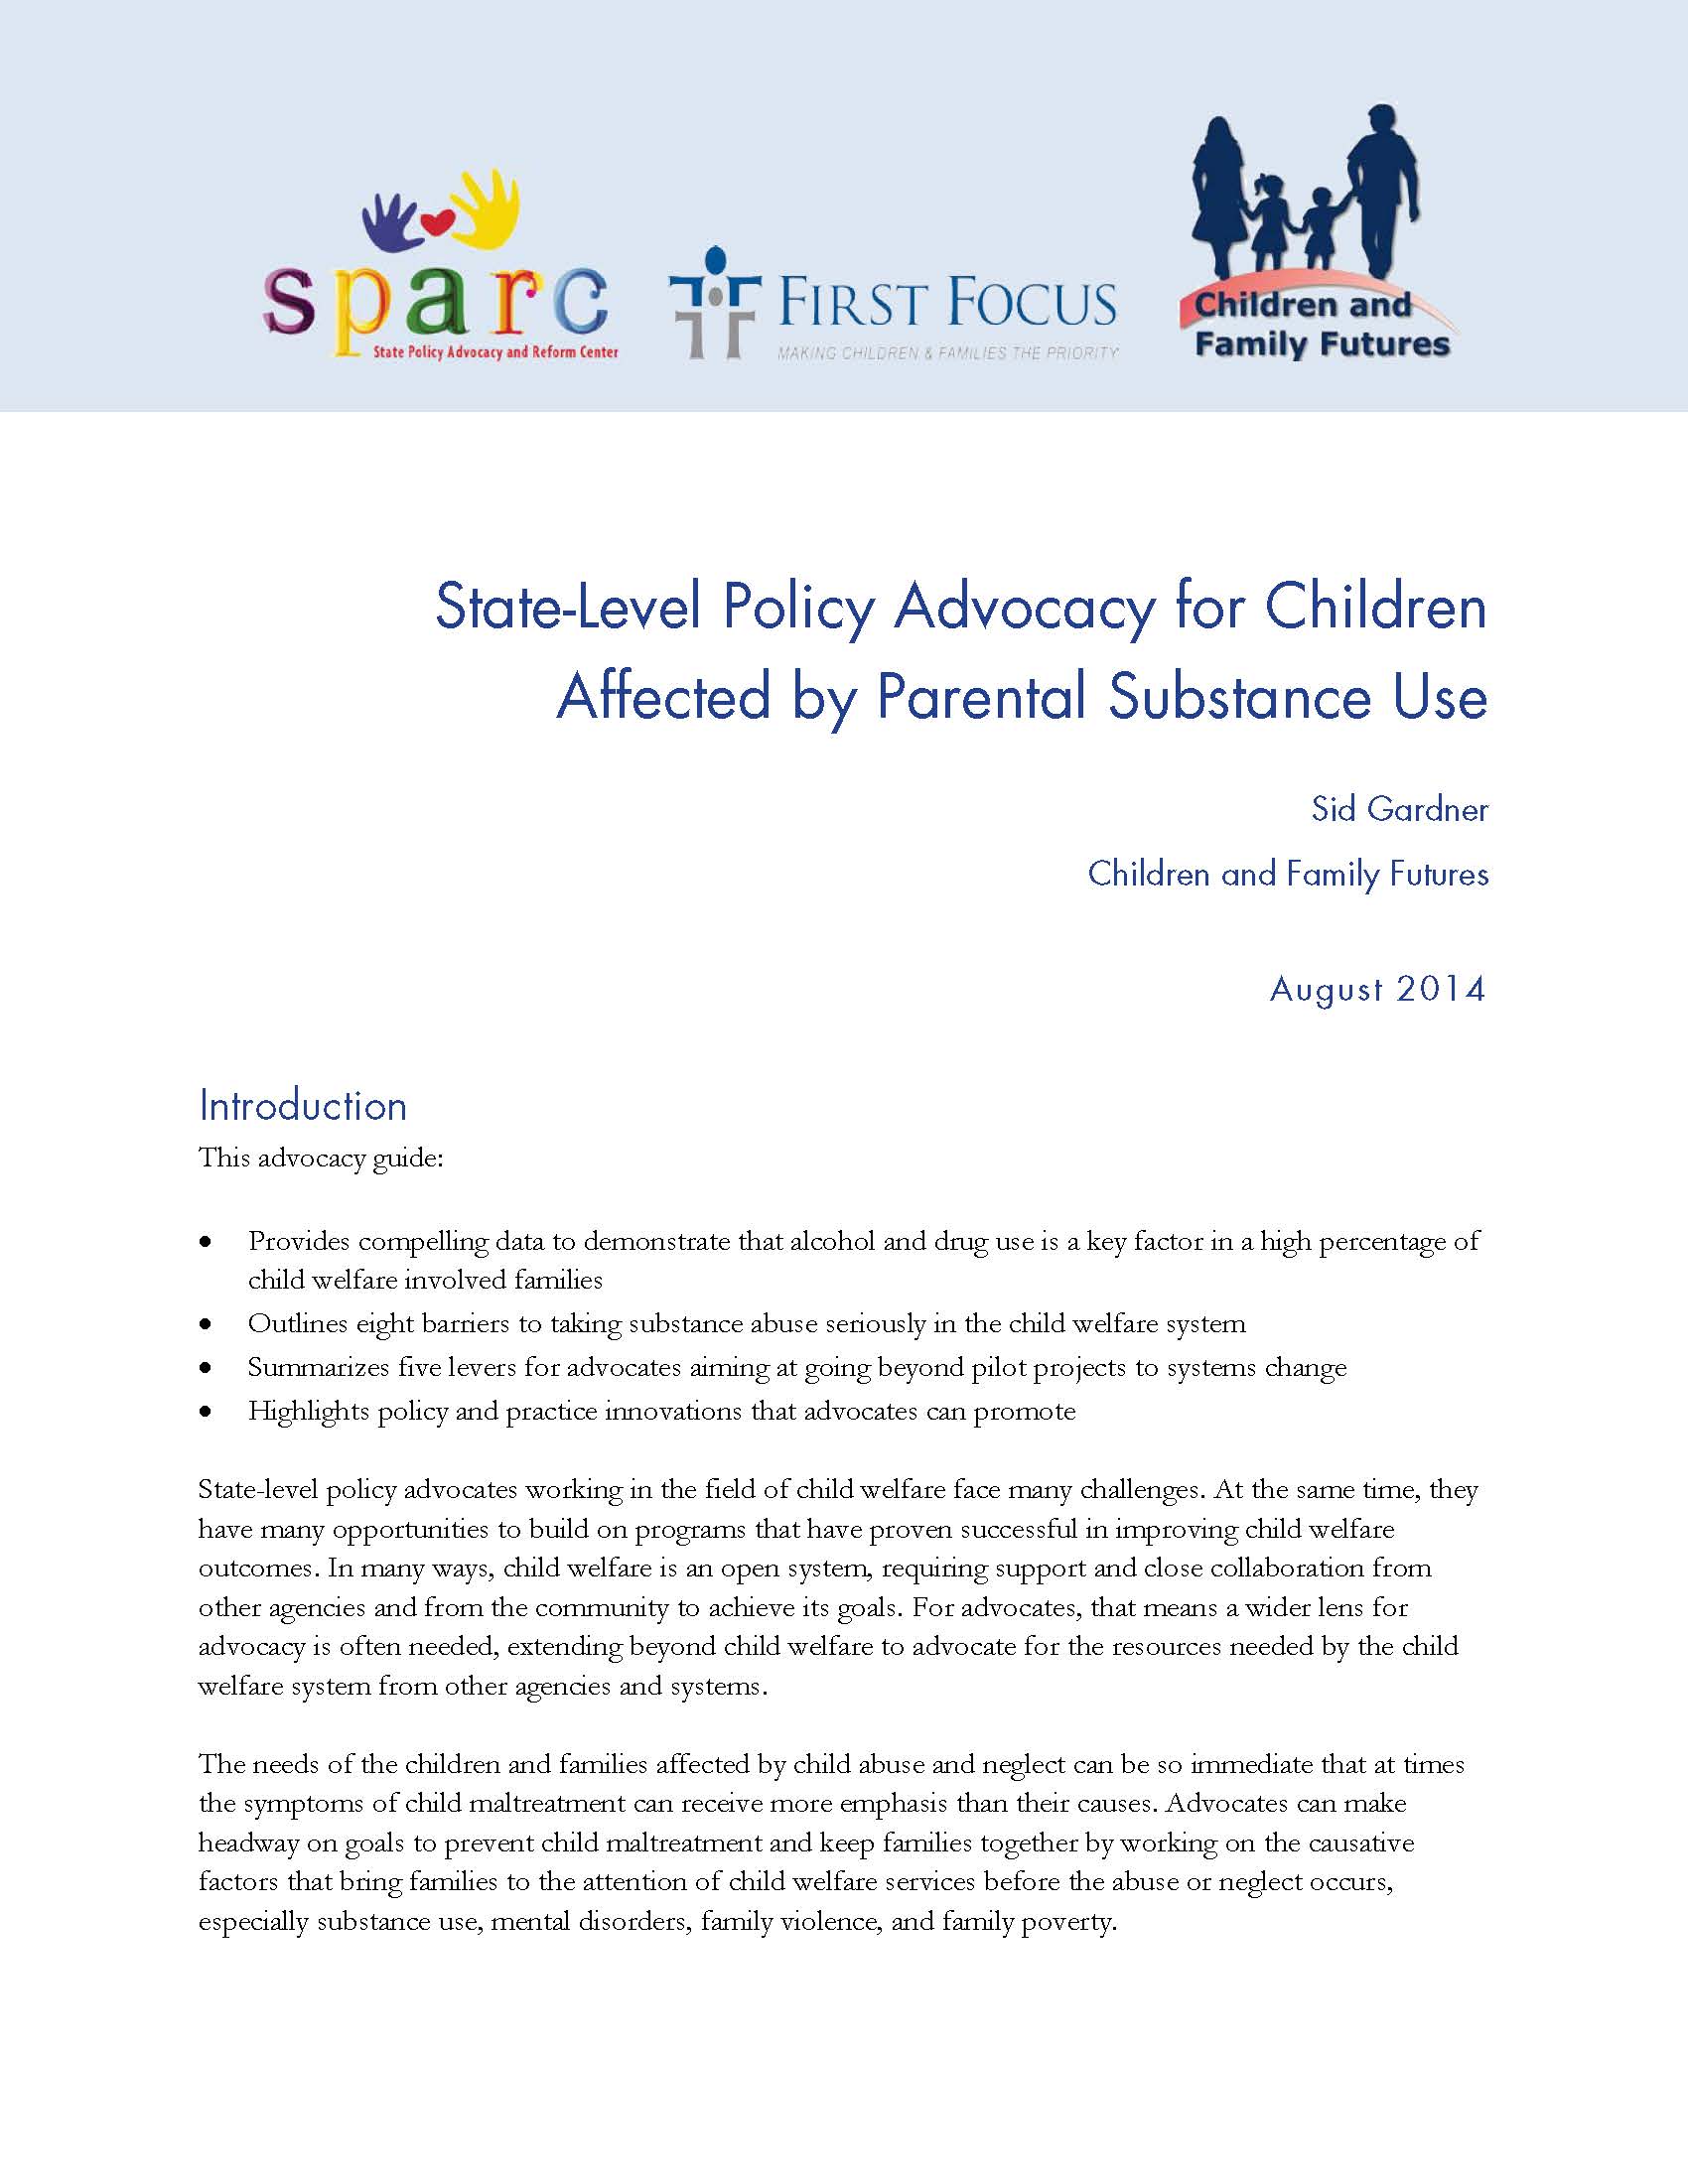 State-Level Policy Advocacy for Children Affected by Parental Substance Use